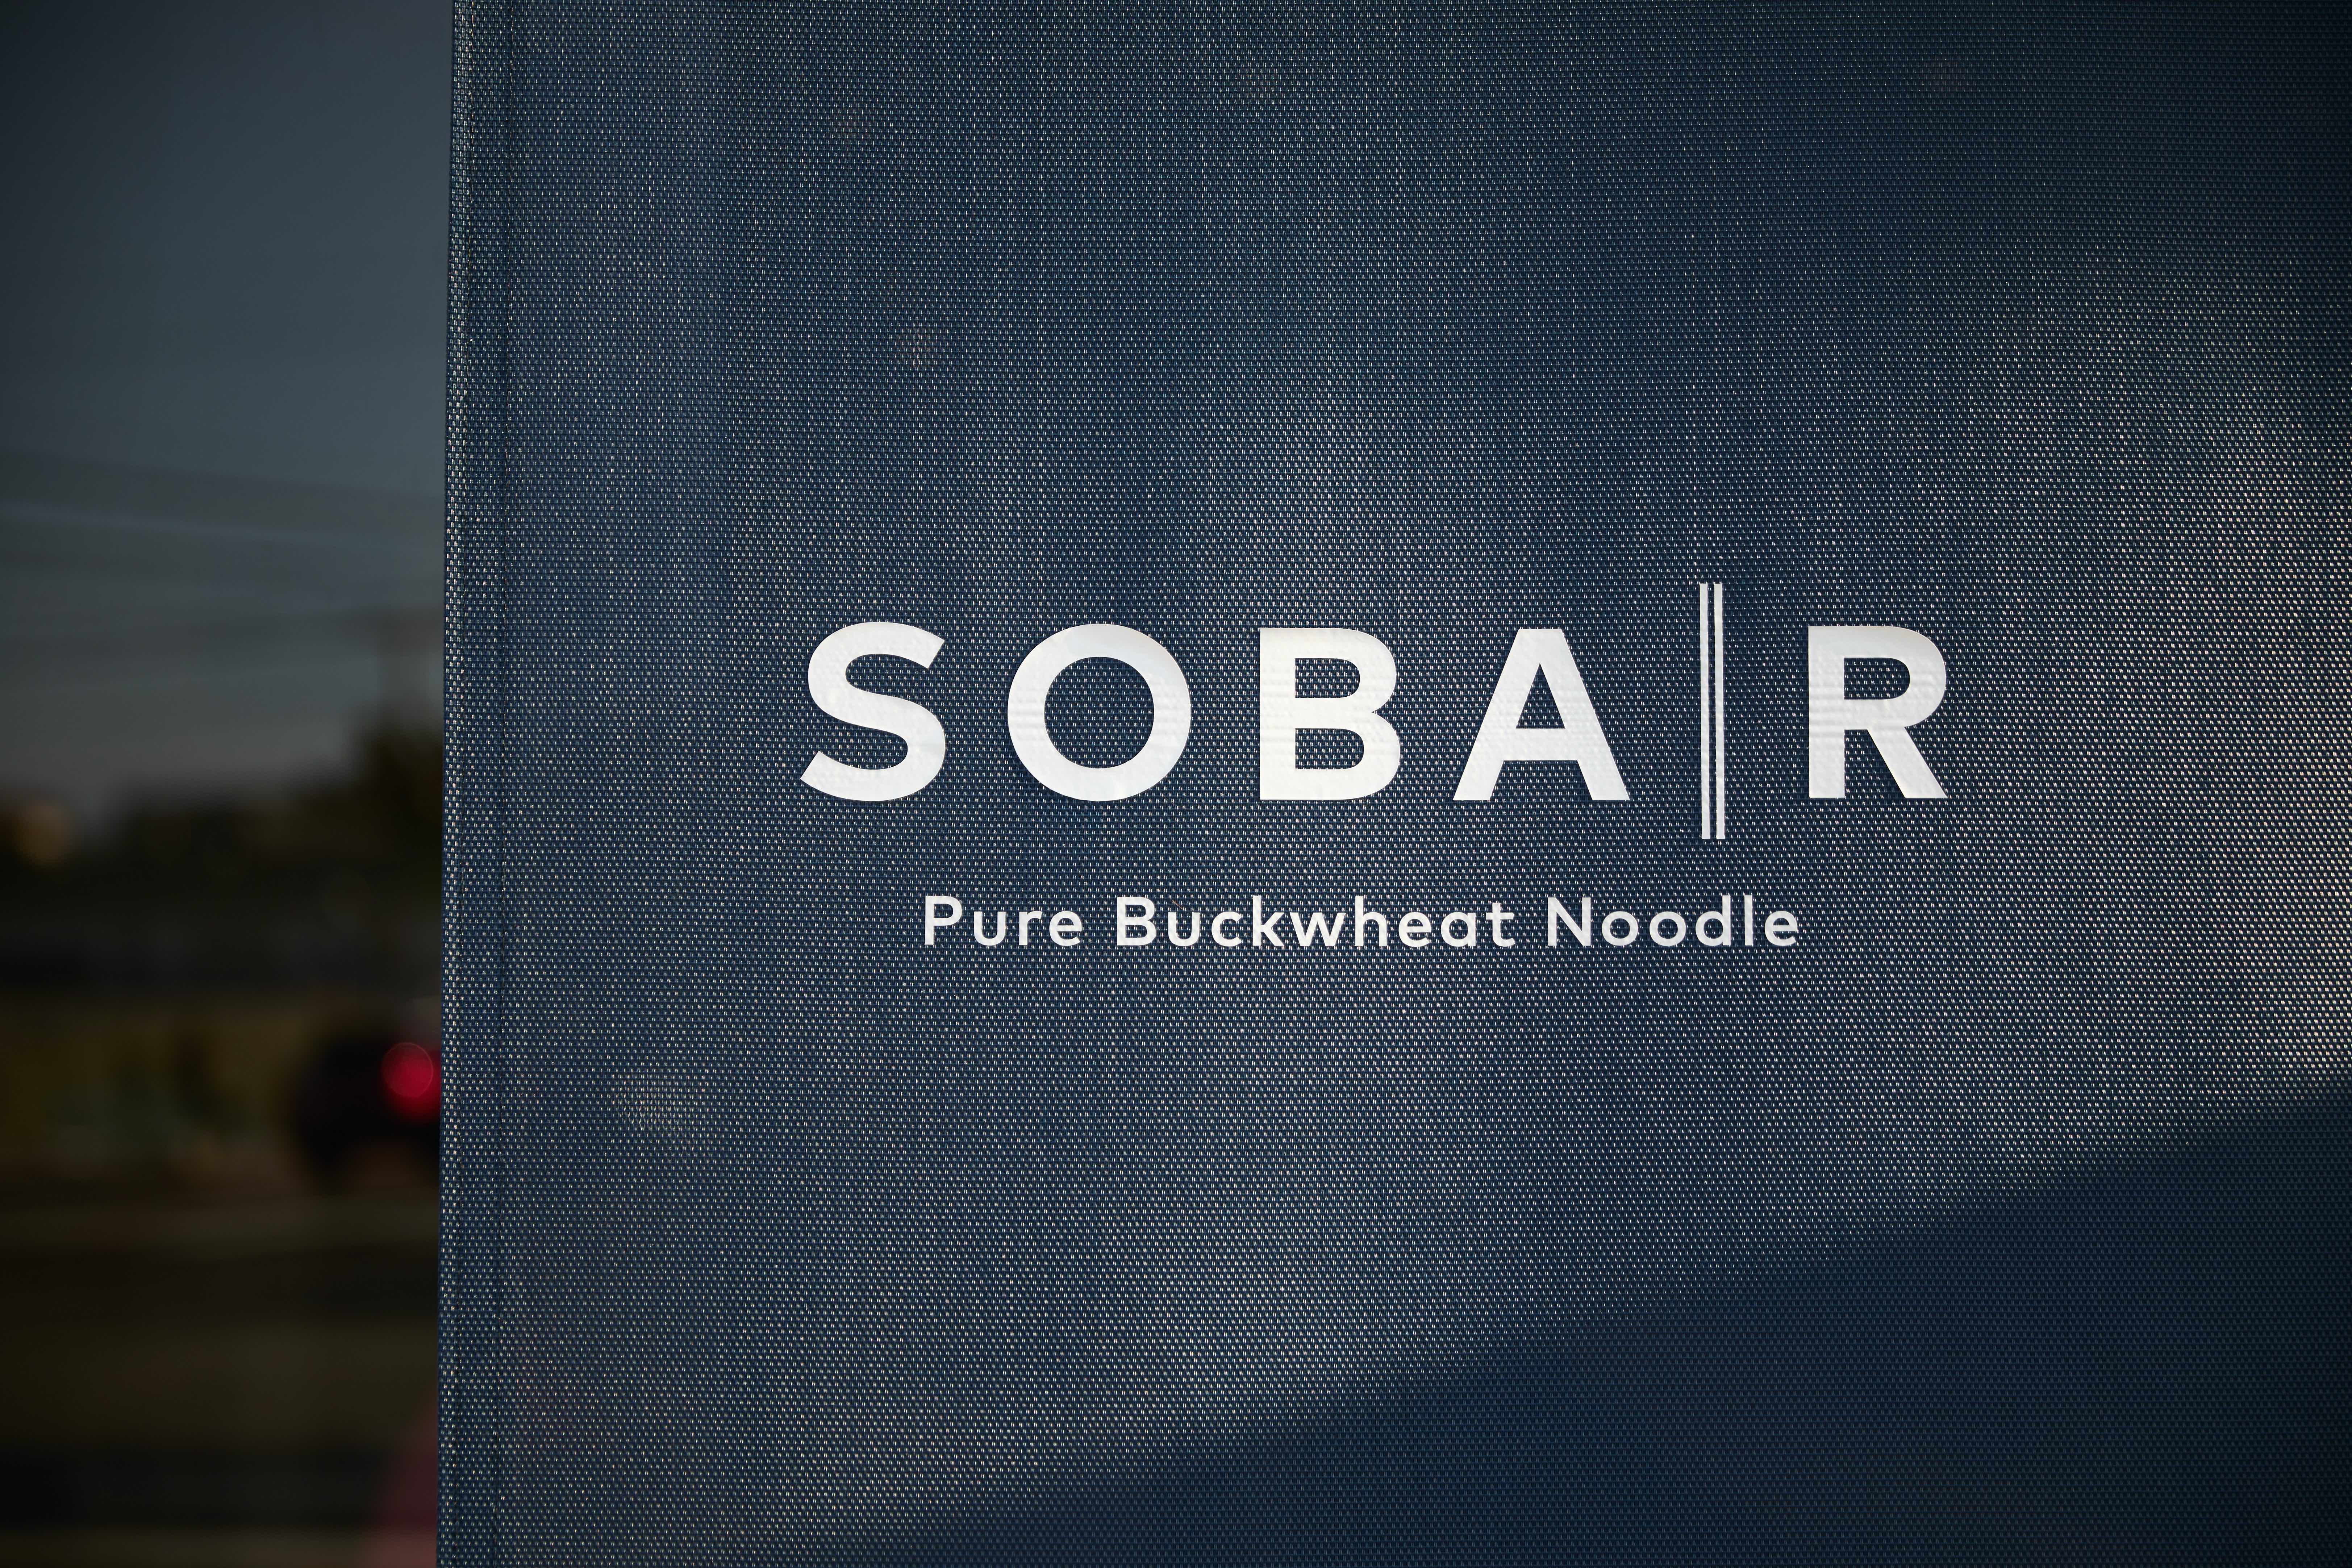 Experience the Authentic Flavor of 100% Buckwheat Noodles at SOBAR: Grand Opening on September 7